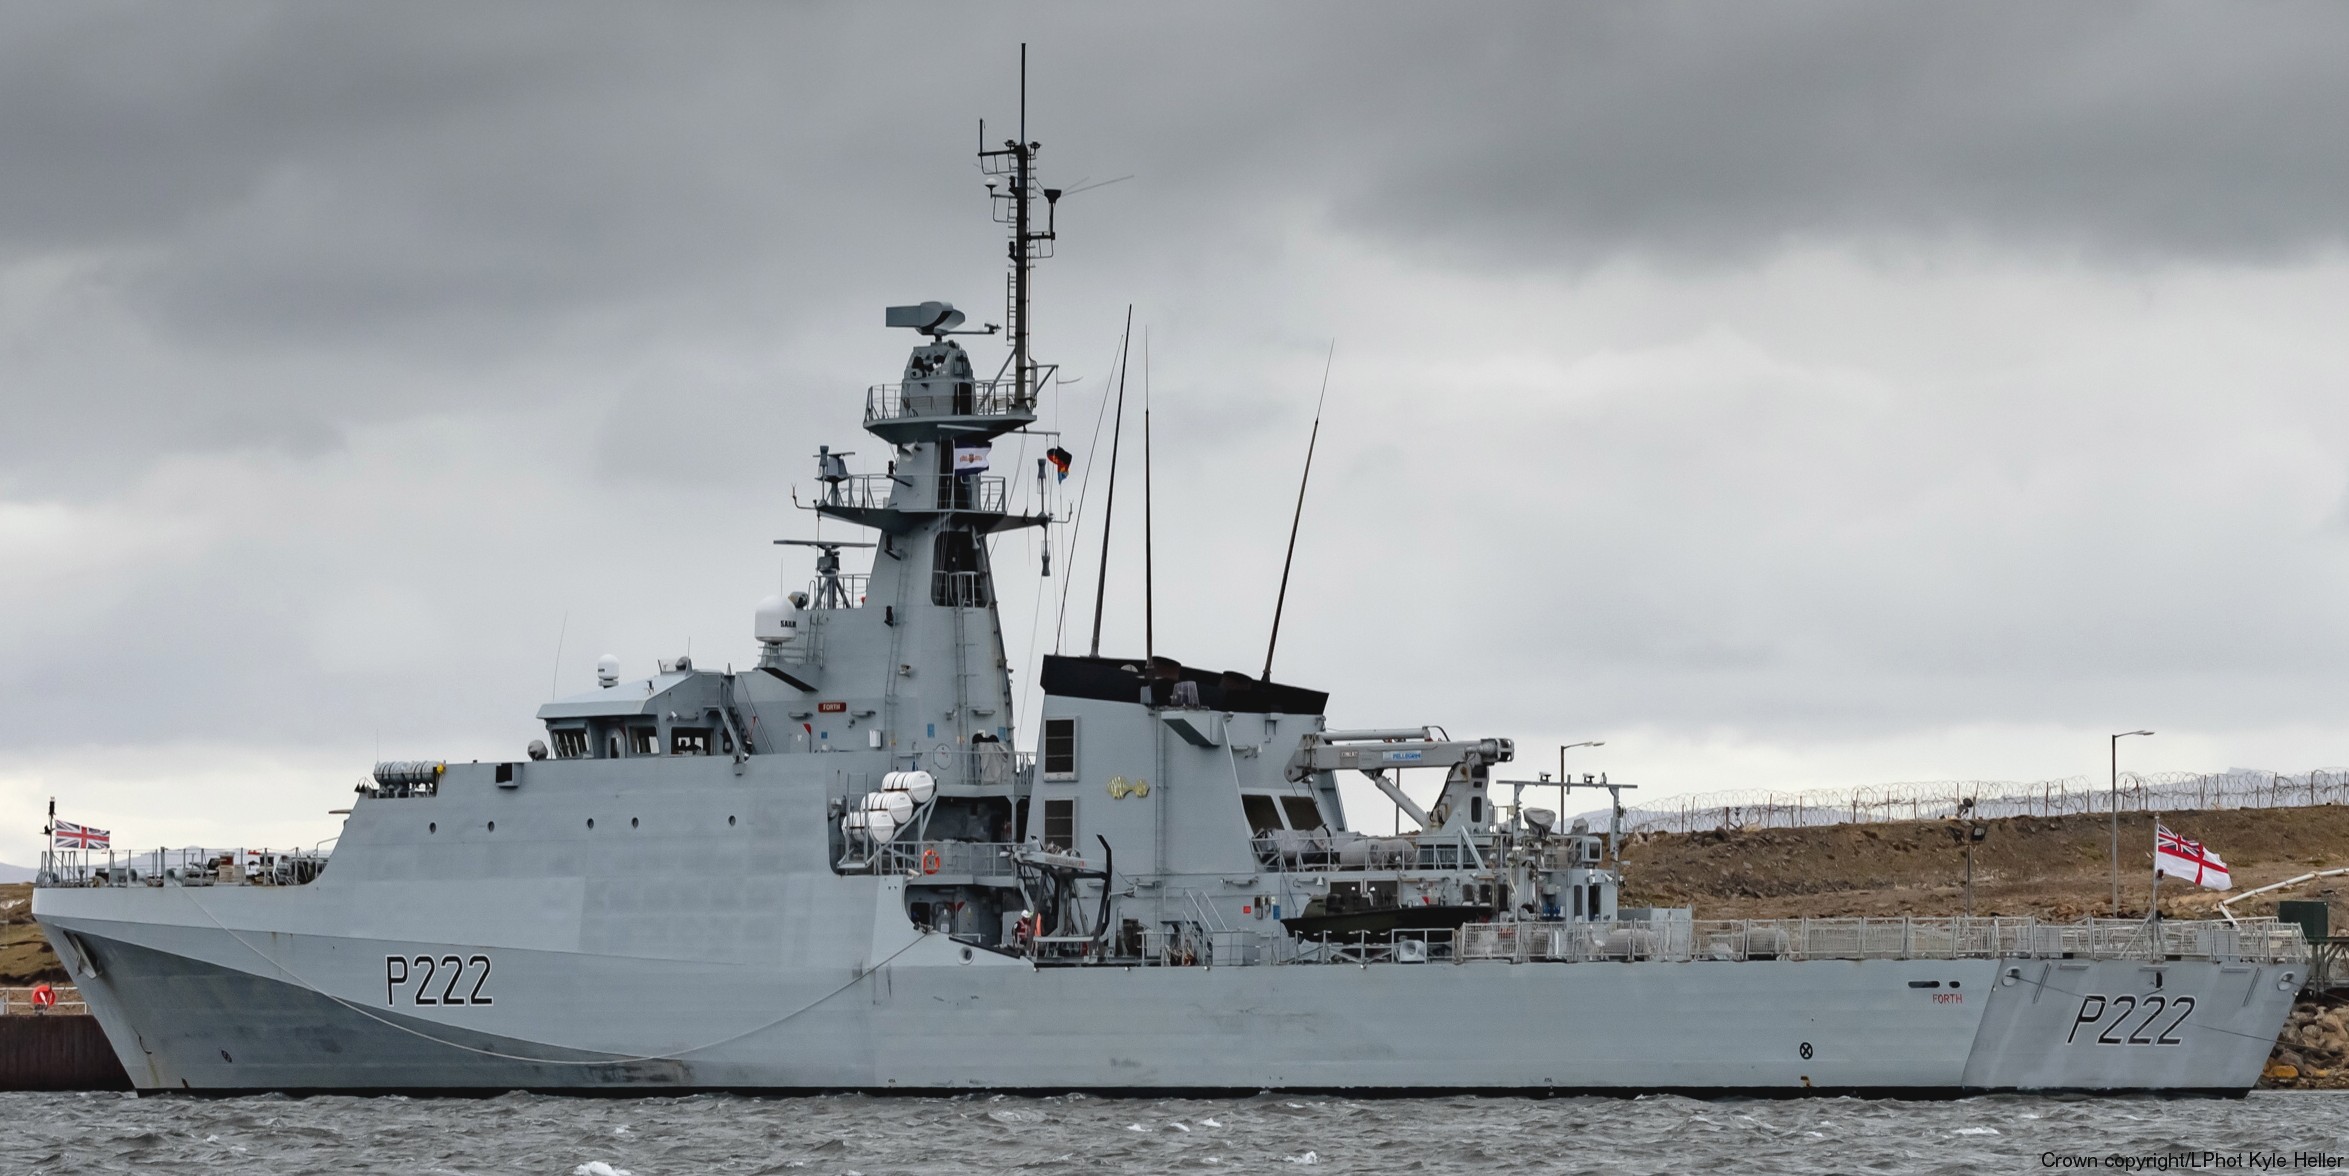 p222 hms forth river class offshore patrol vessel opv royal navy 39